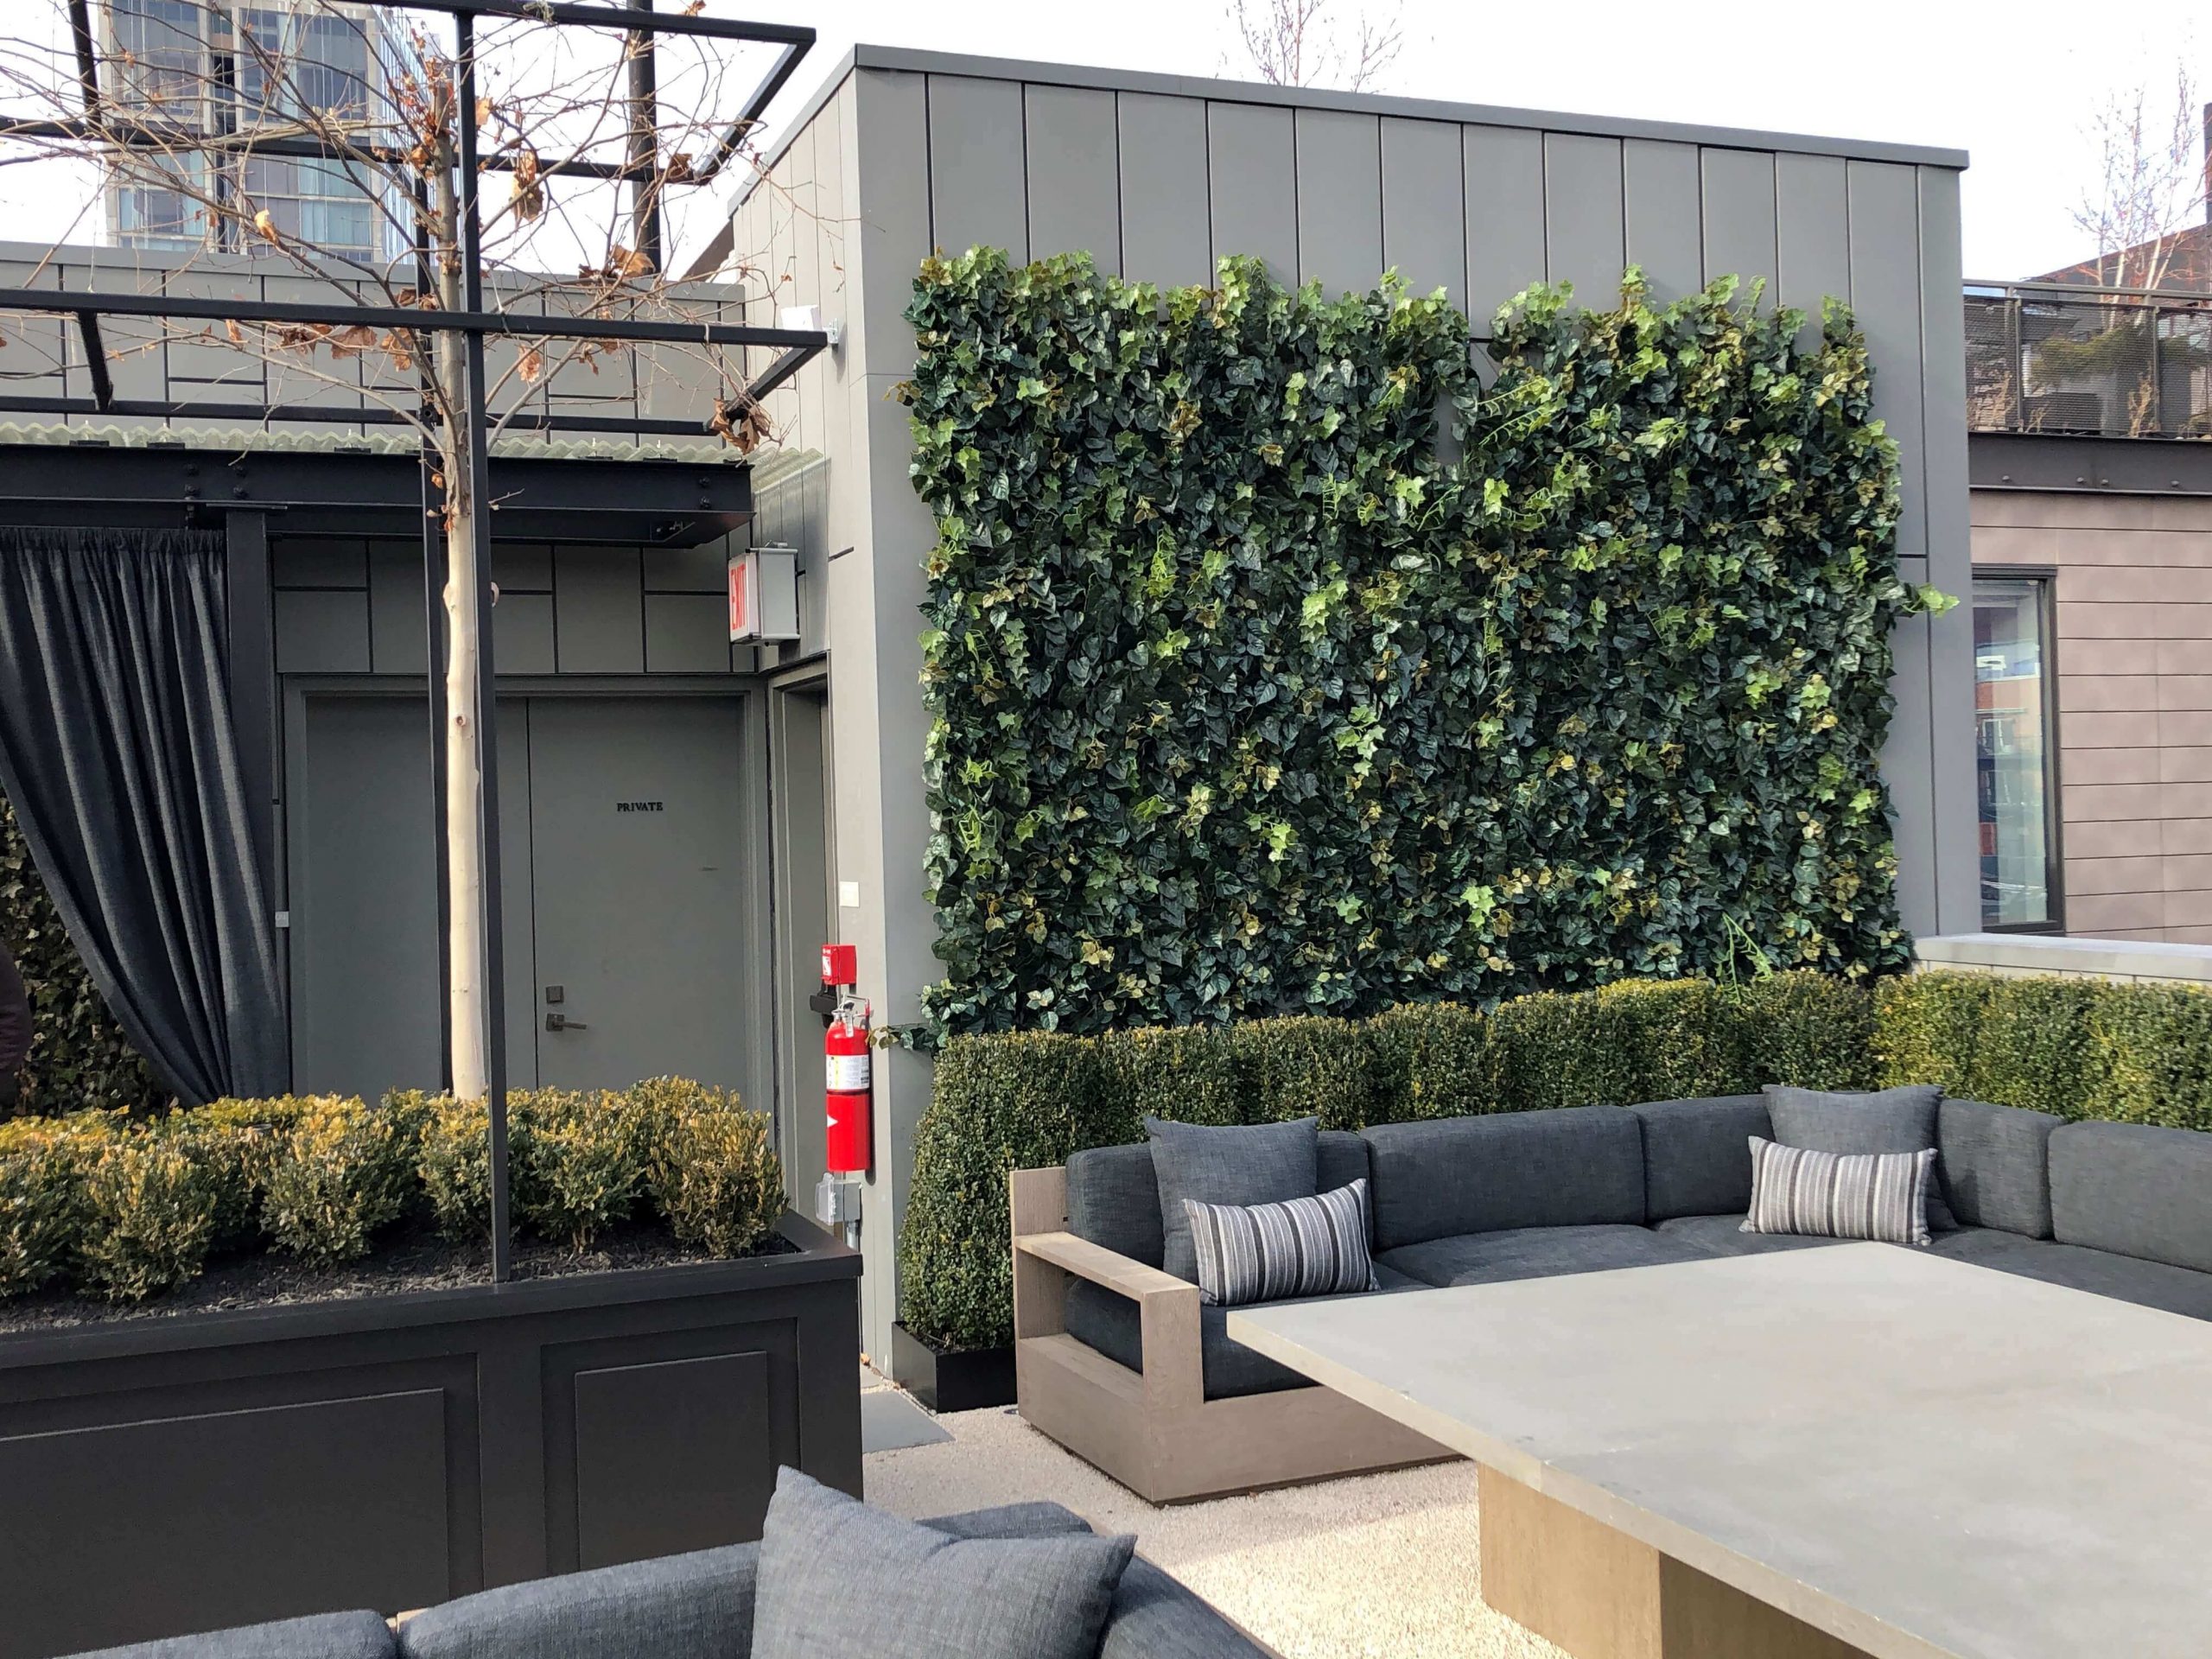 Fabricated Exterior Green Wall & Preserved Boxwood Hedges at RH New York Restaurant